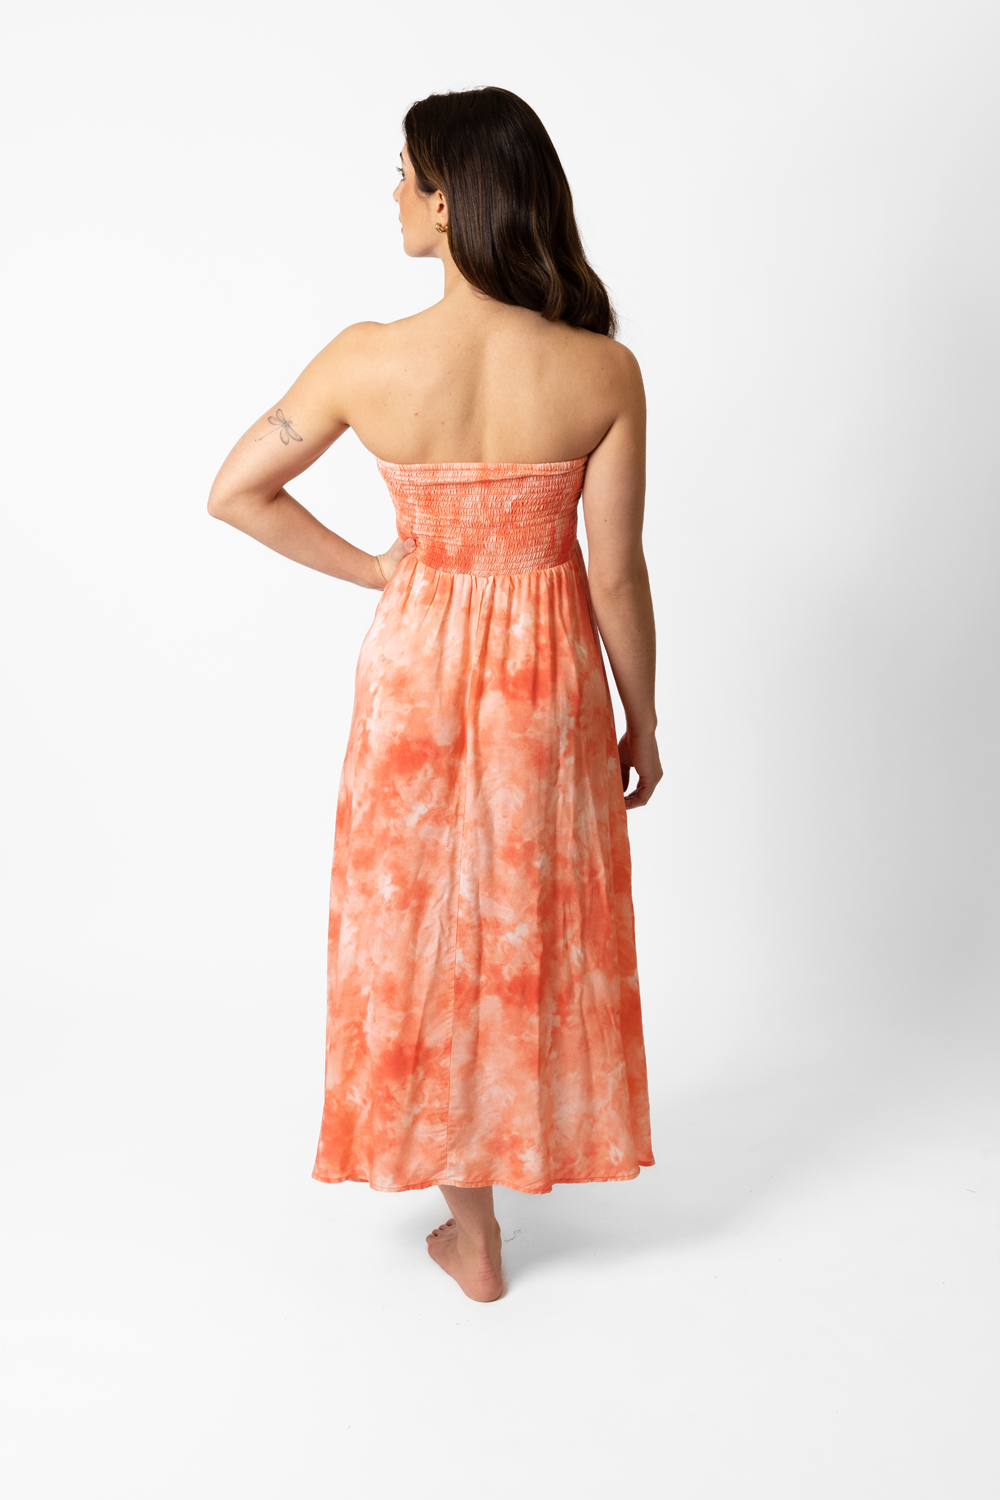 The back of a woman with one hand on the waist and the other relaxed wearing Koy Resort Aquarelle spring 2023 collection coral tie-dye dress that drops to her ankles.